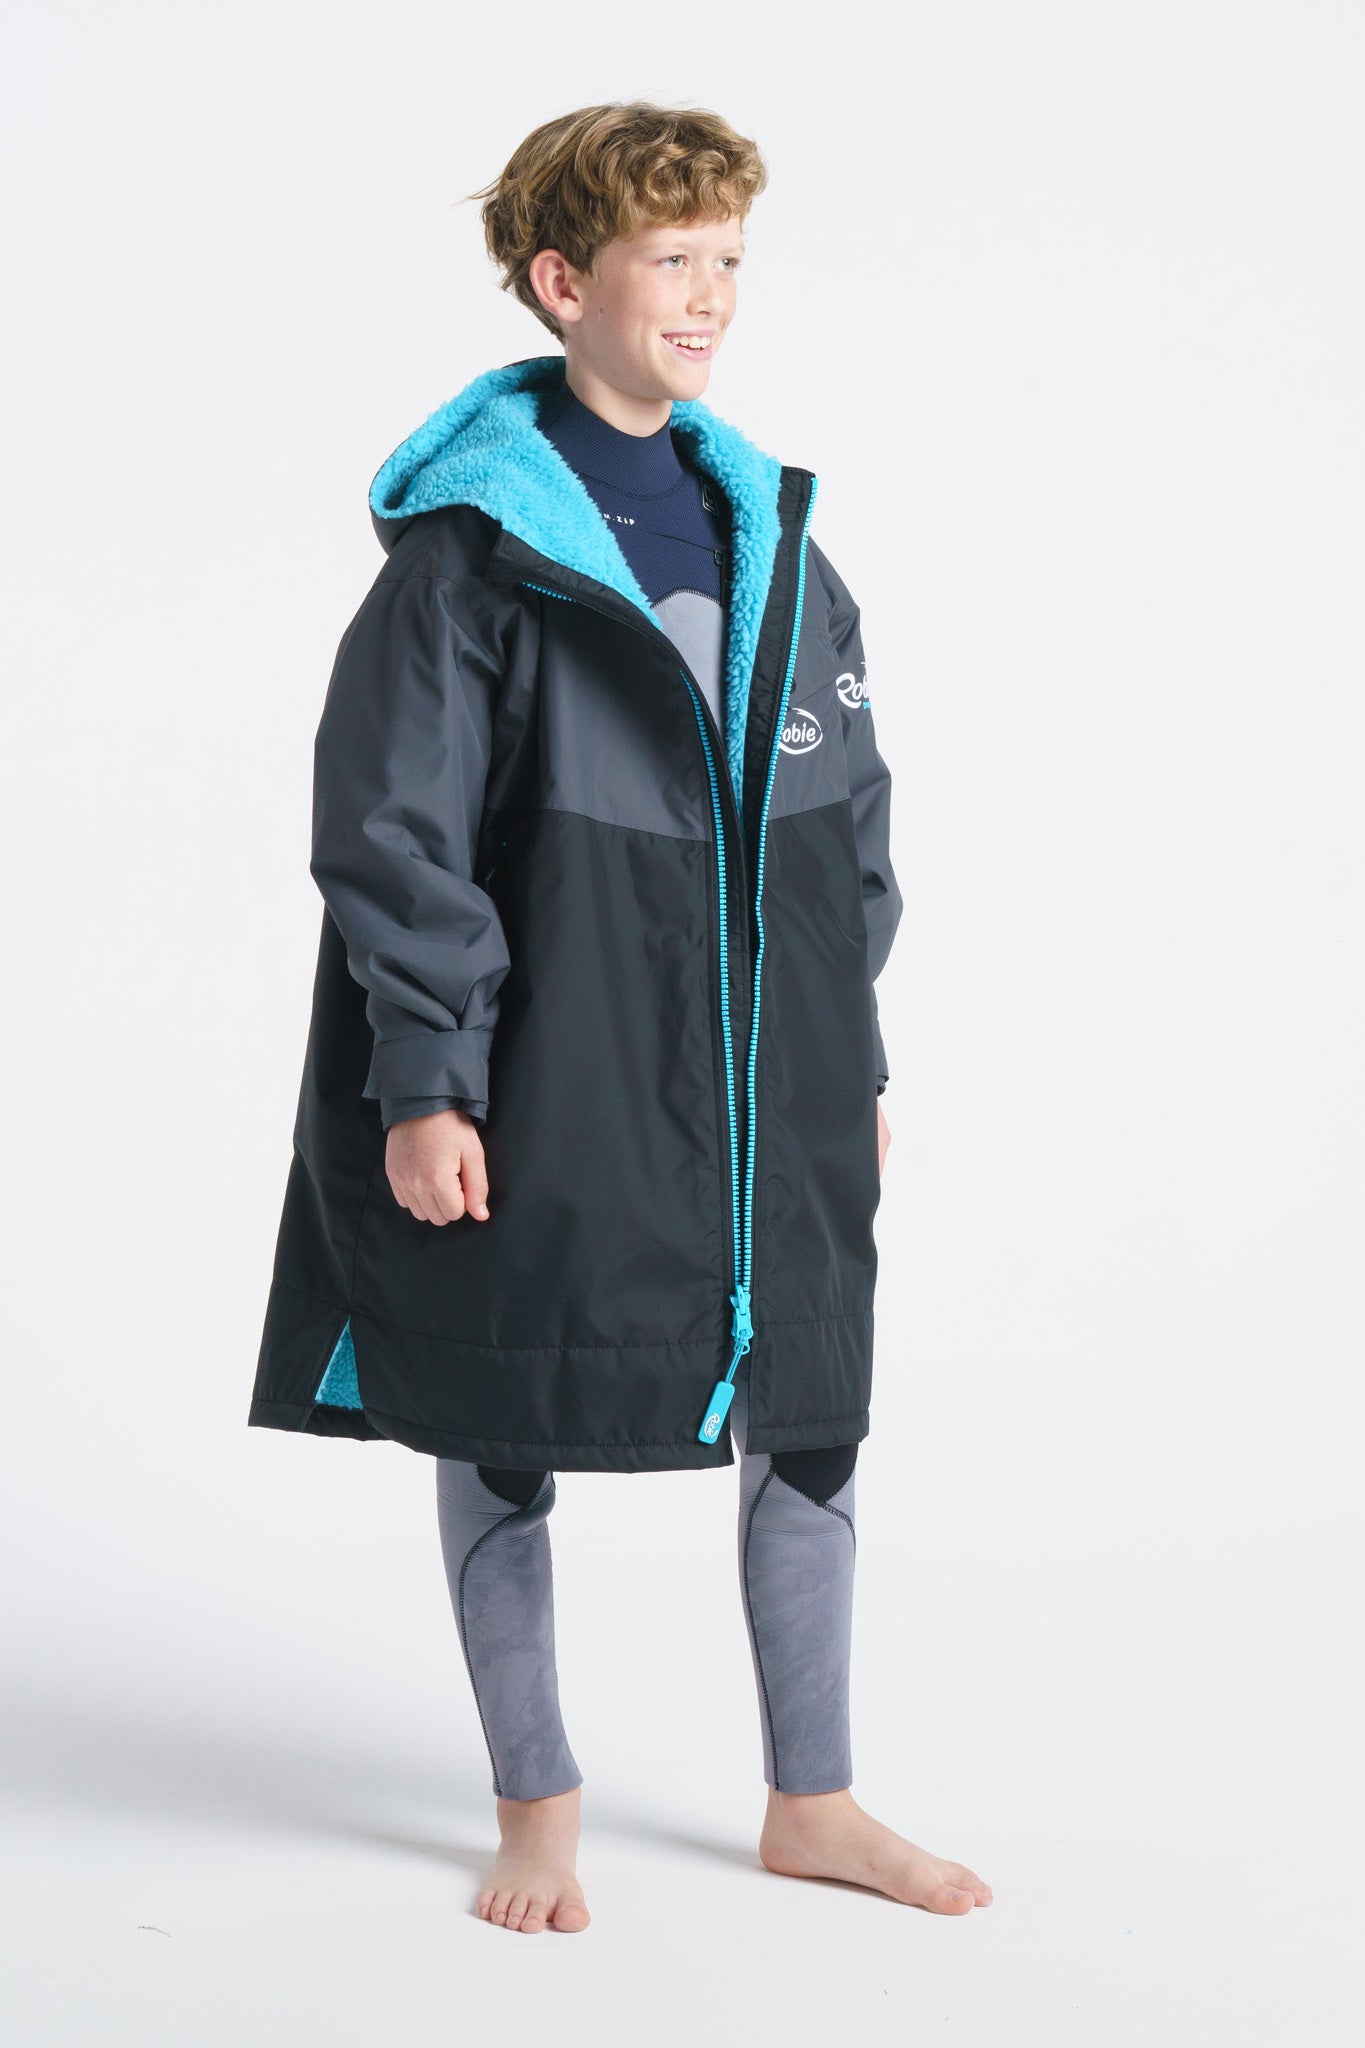 robie-robes-dry-series-changing-robe-waterproof-preorder-product-blacksheepsurfco-galway-ireland-charcoal-blue-atoll-junior-front